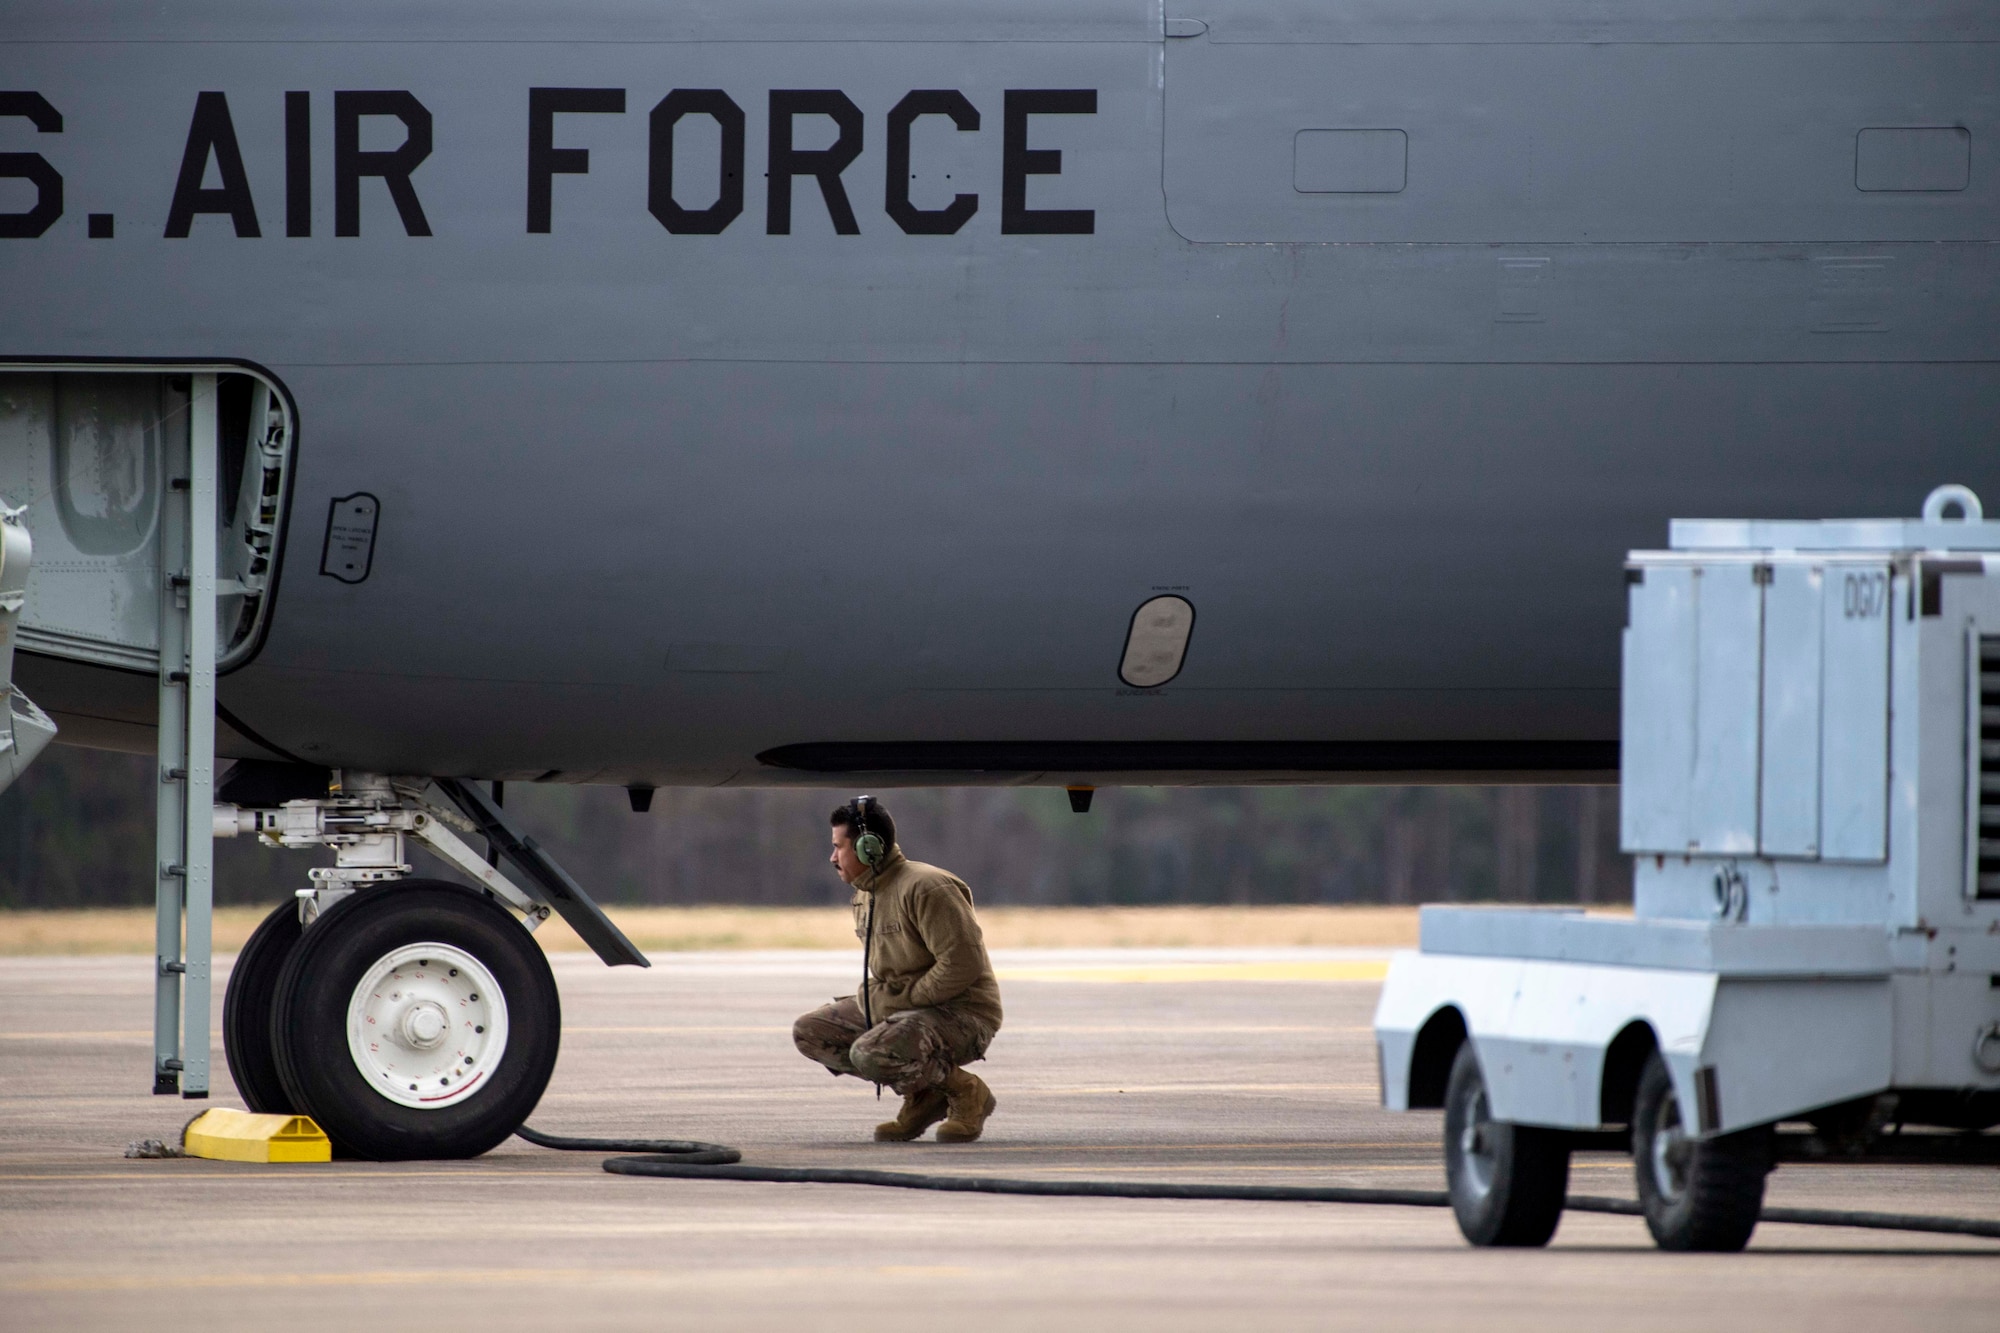 U.S. Air Force Staff Sgt. Jose A. Reyes, a 911th Air Refueling Squadron (ARS) dedicated crew chief, squats near a KC-135 Stratotanker, during pre-flight checks before takeoff from Seymour Johnson Air Force Base, North Carolina, Dec. 12, 2019. The 911 ARS prepared for their final mission on a KC-135 Stratotanker. (U.S. Air Force photo by Staff Sgt. Mary McKnight)